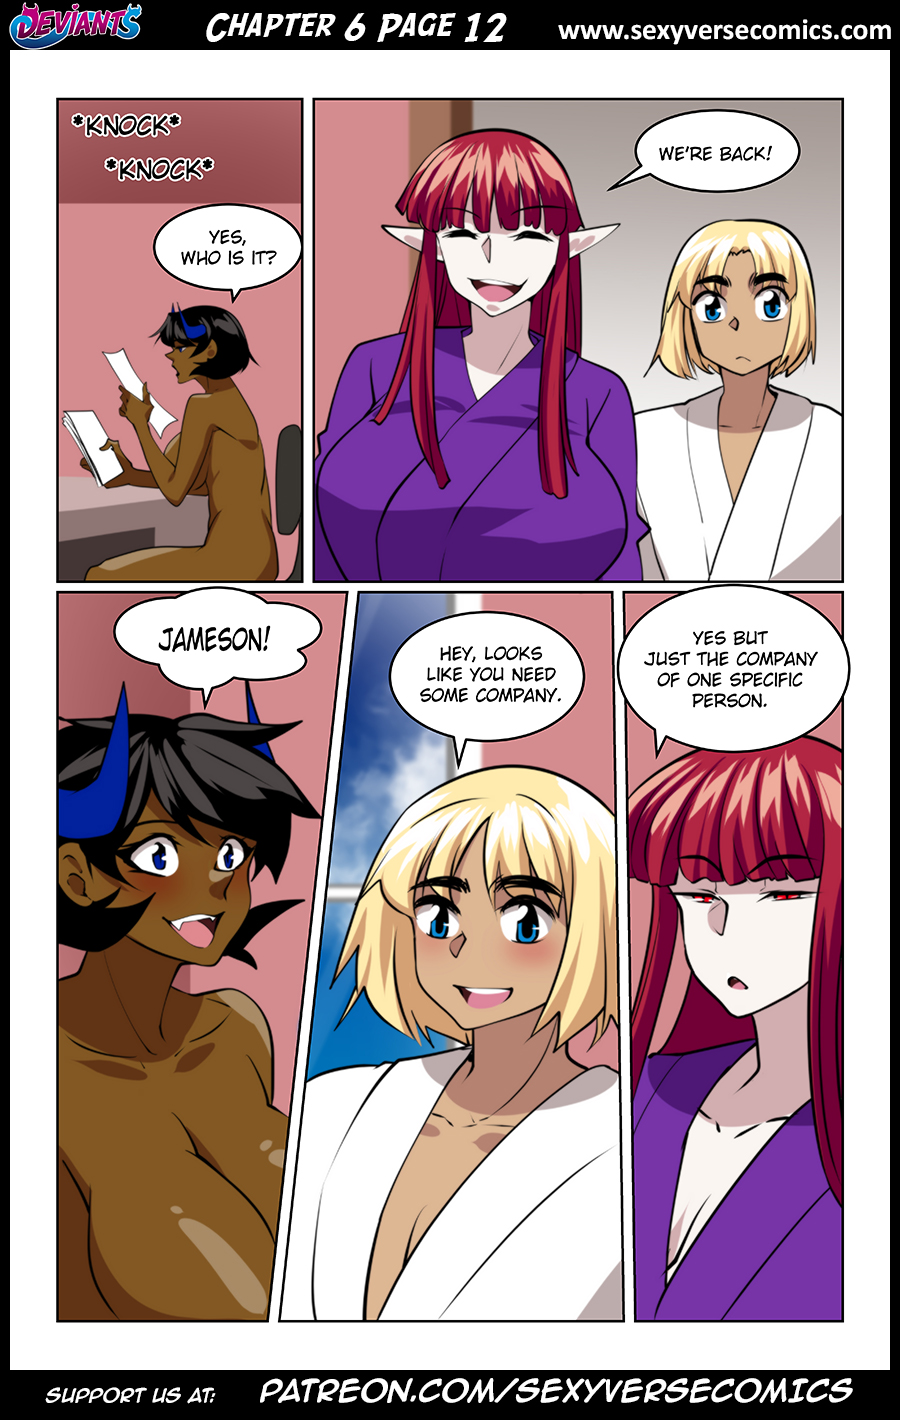 Deviants Chapter 6 Page 12